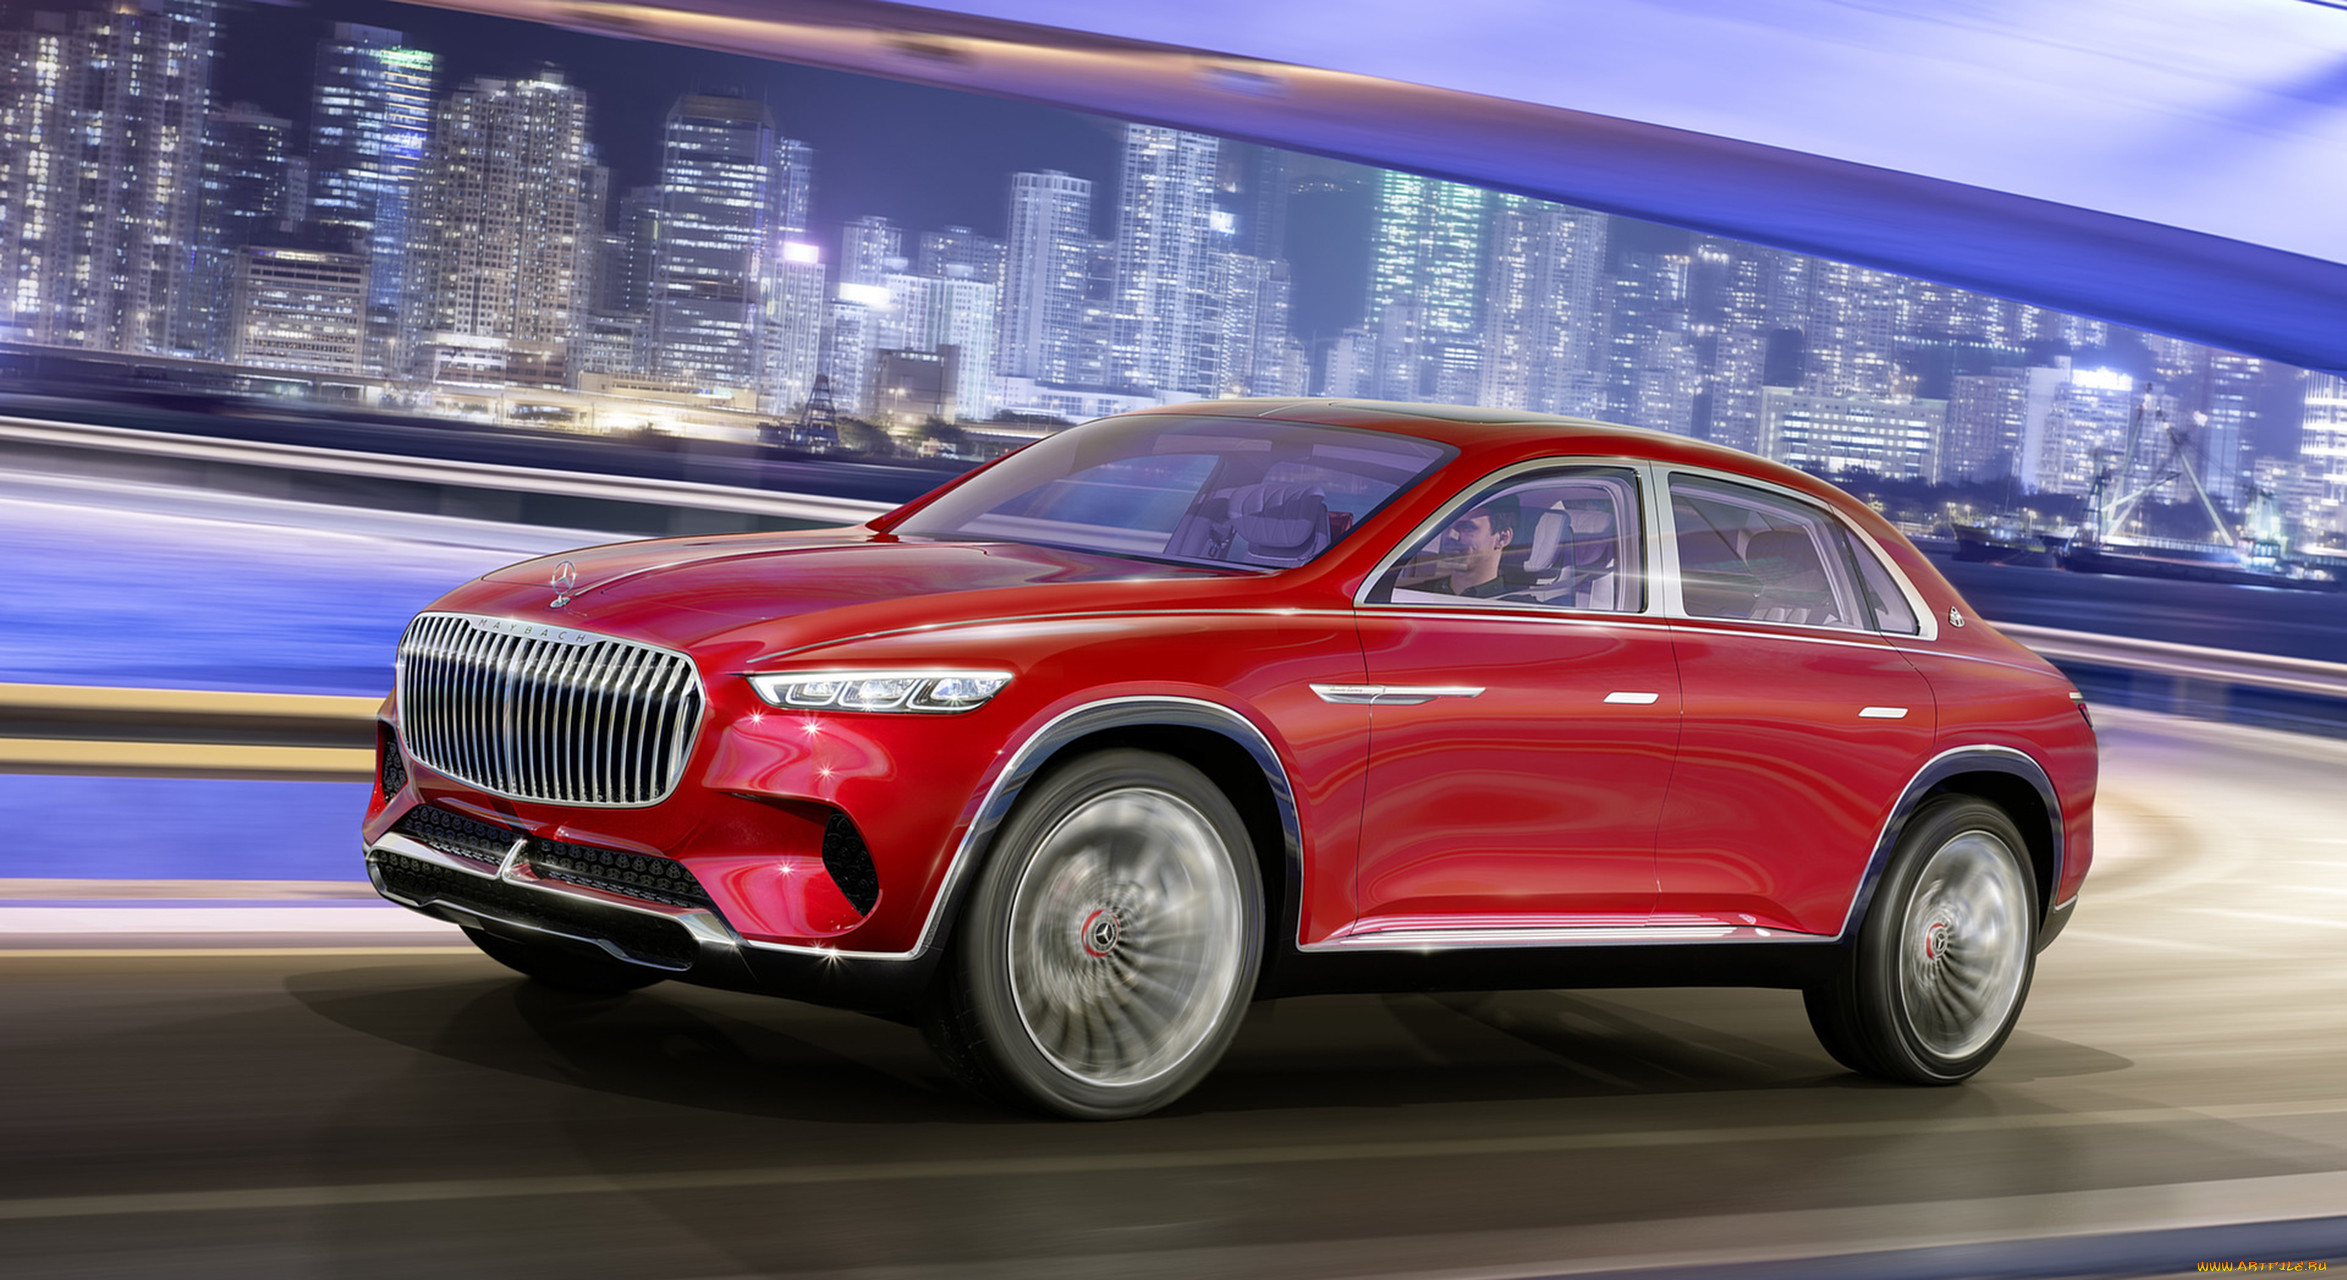 mercedes-maybach vision ultimate luxury suv concept 2018, , mercedes-benz, ultimate, 2018, mercedes-maybach, luxury, suv, concept, vision